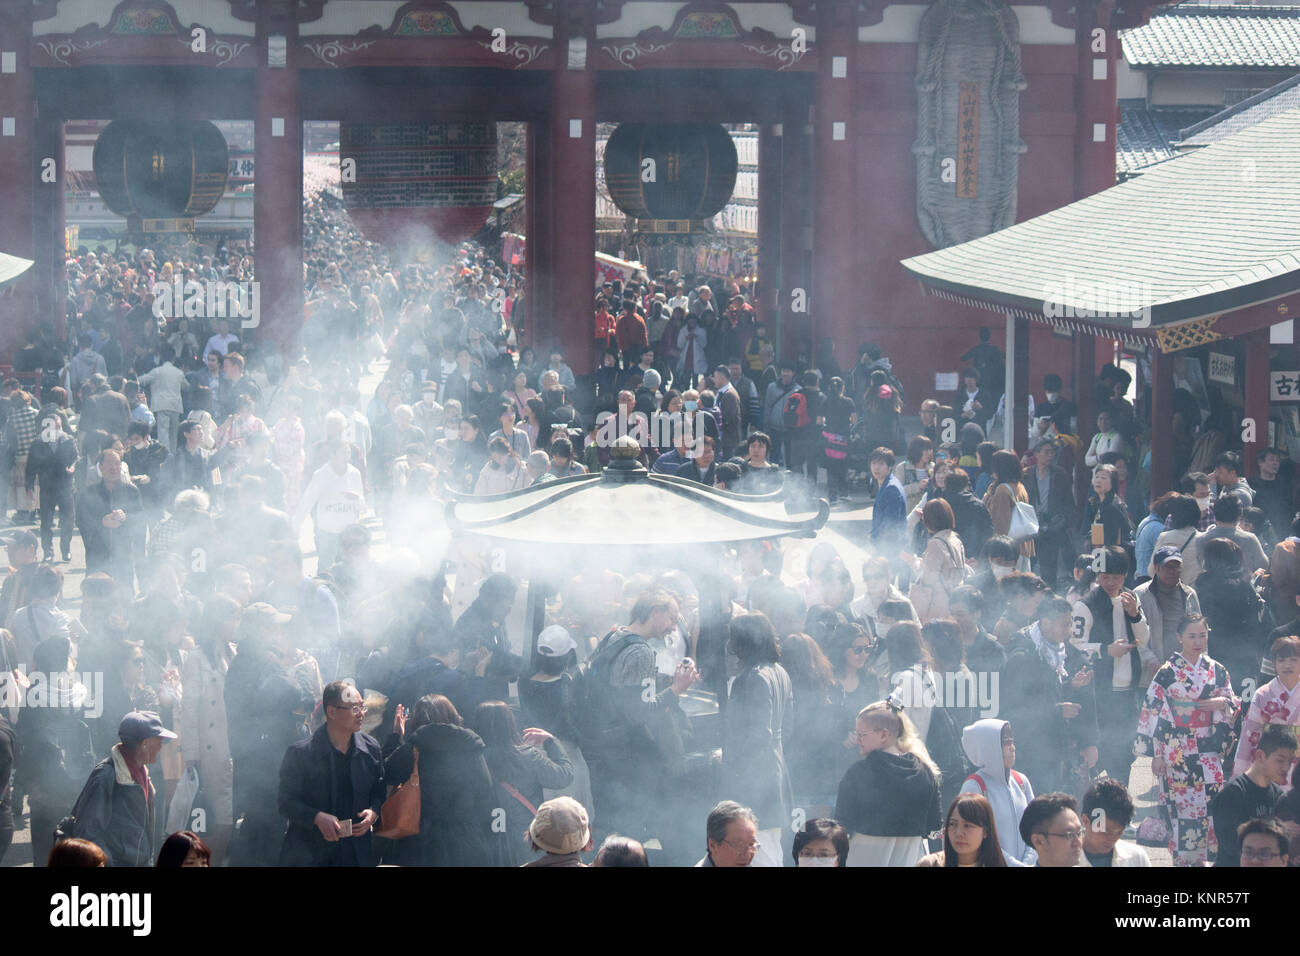 Burning incense causing large clouds outside the  Sensō-ji, historic Buddhist Temple in Tokyo packed with people. Stock Photo